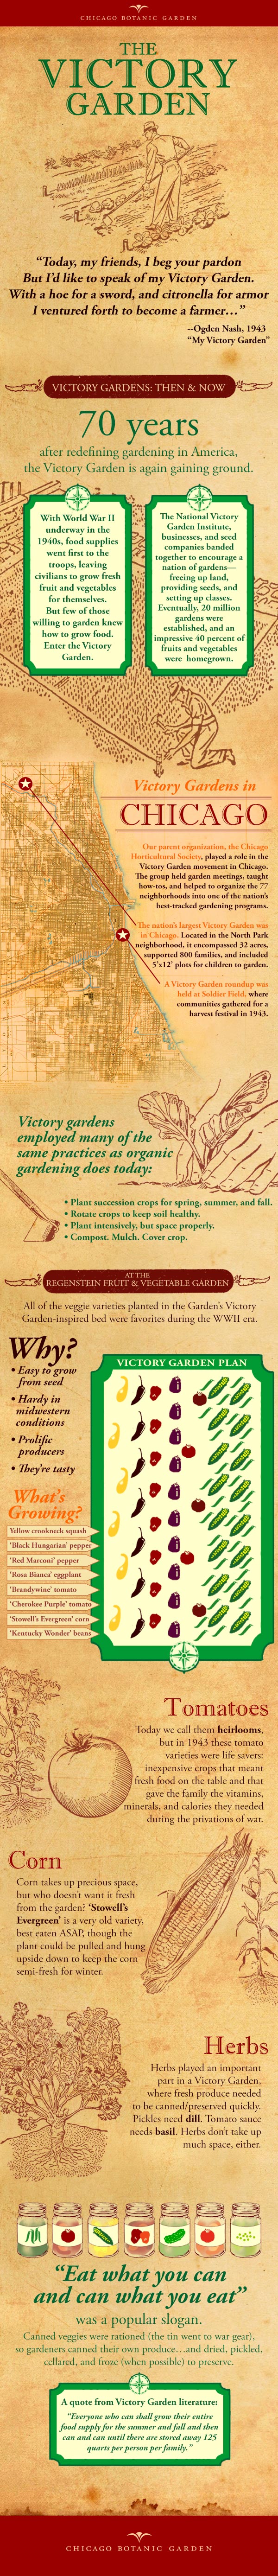 An infographic about Victory Gardens